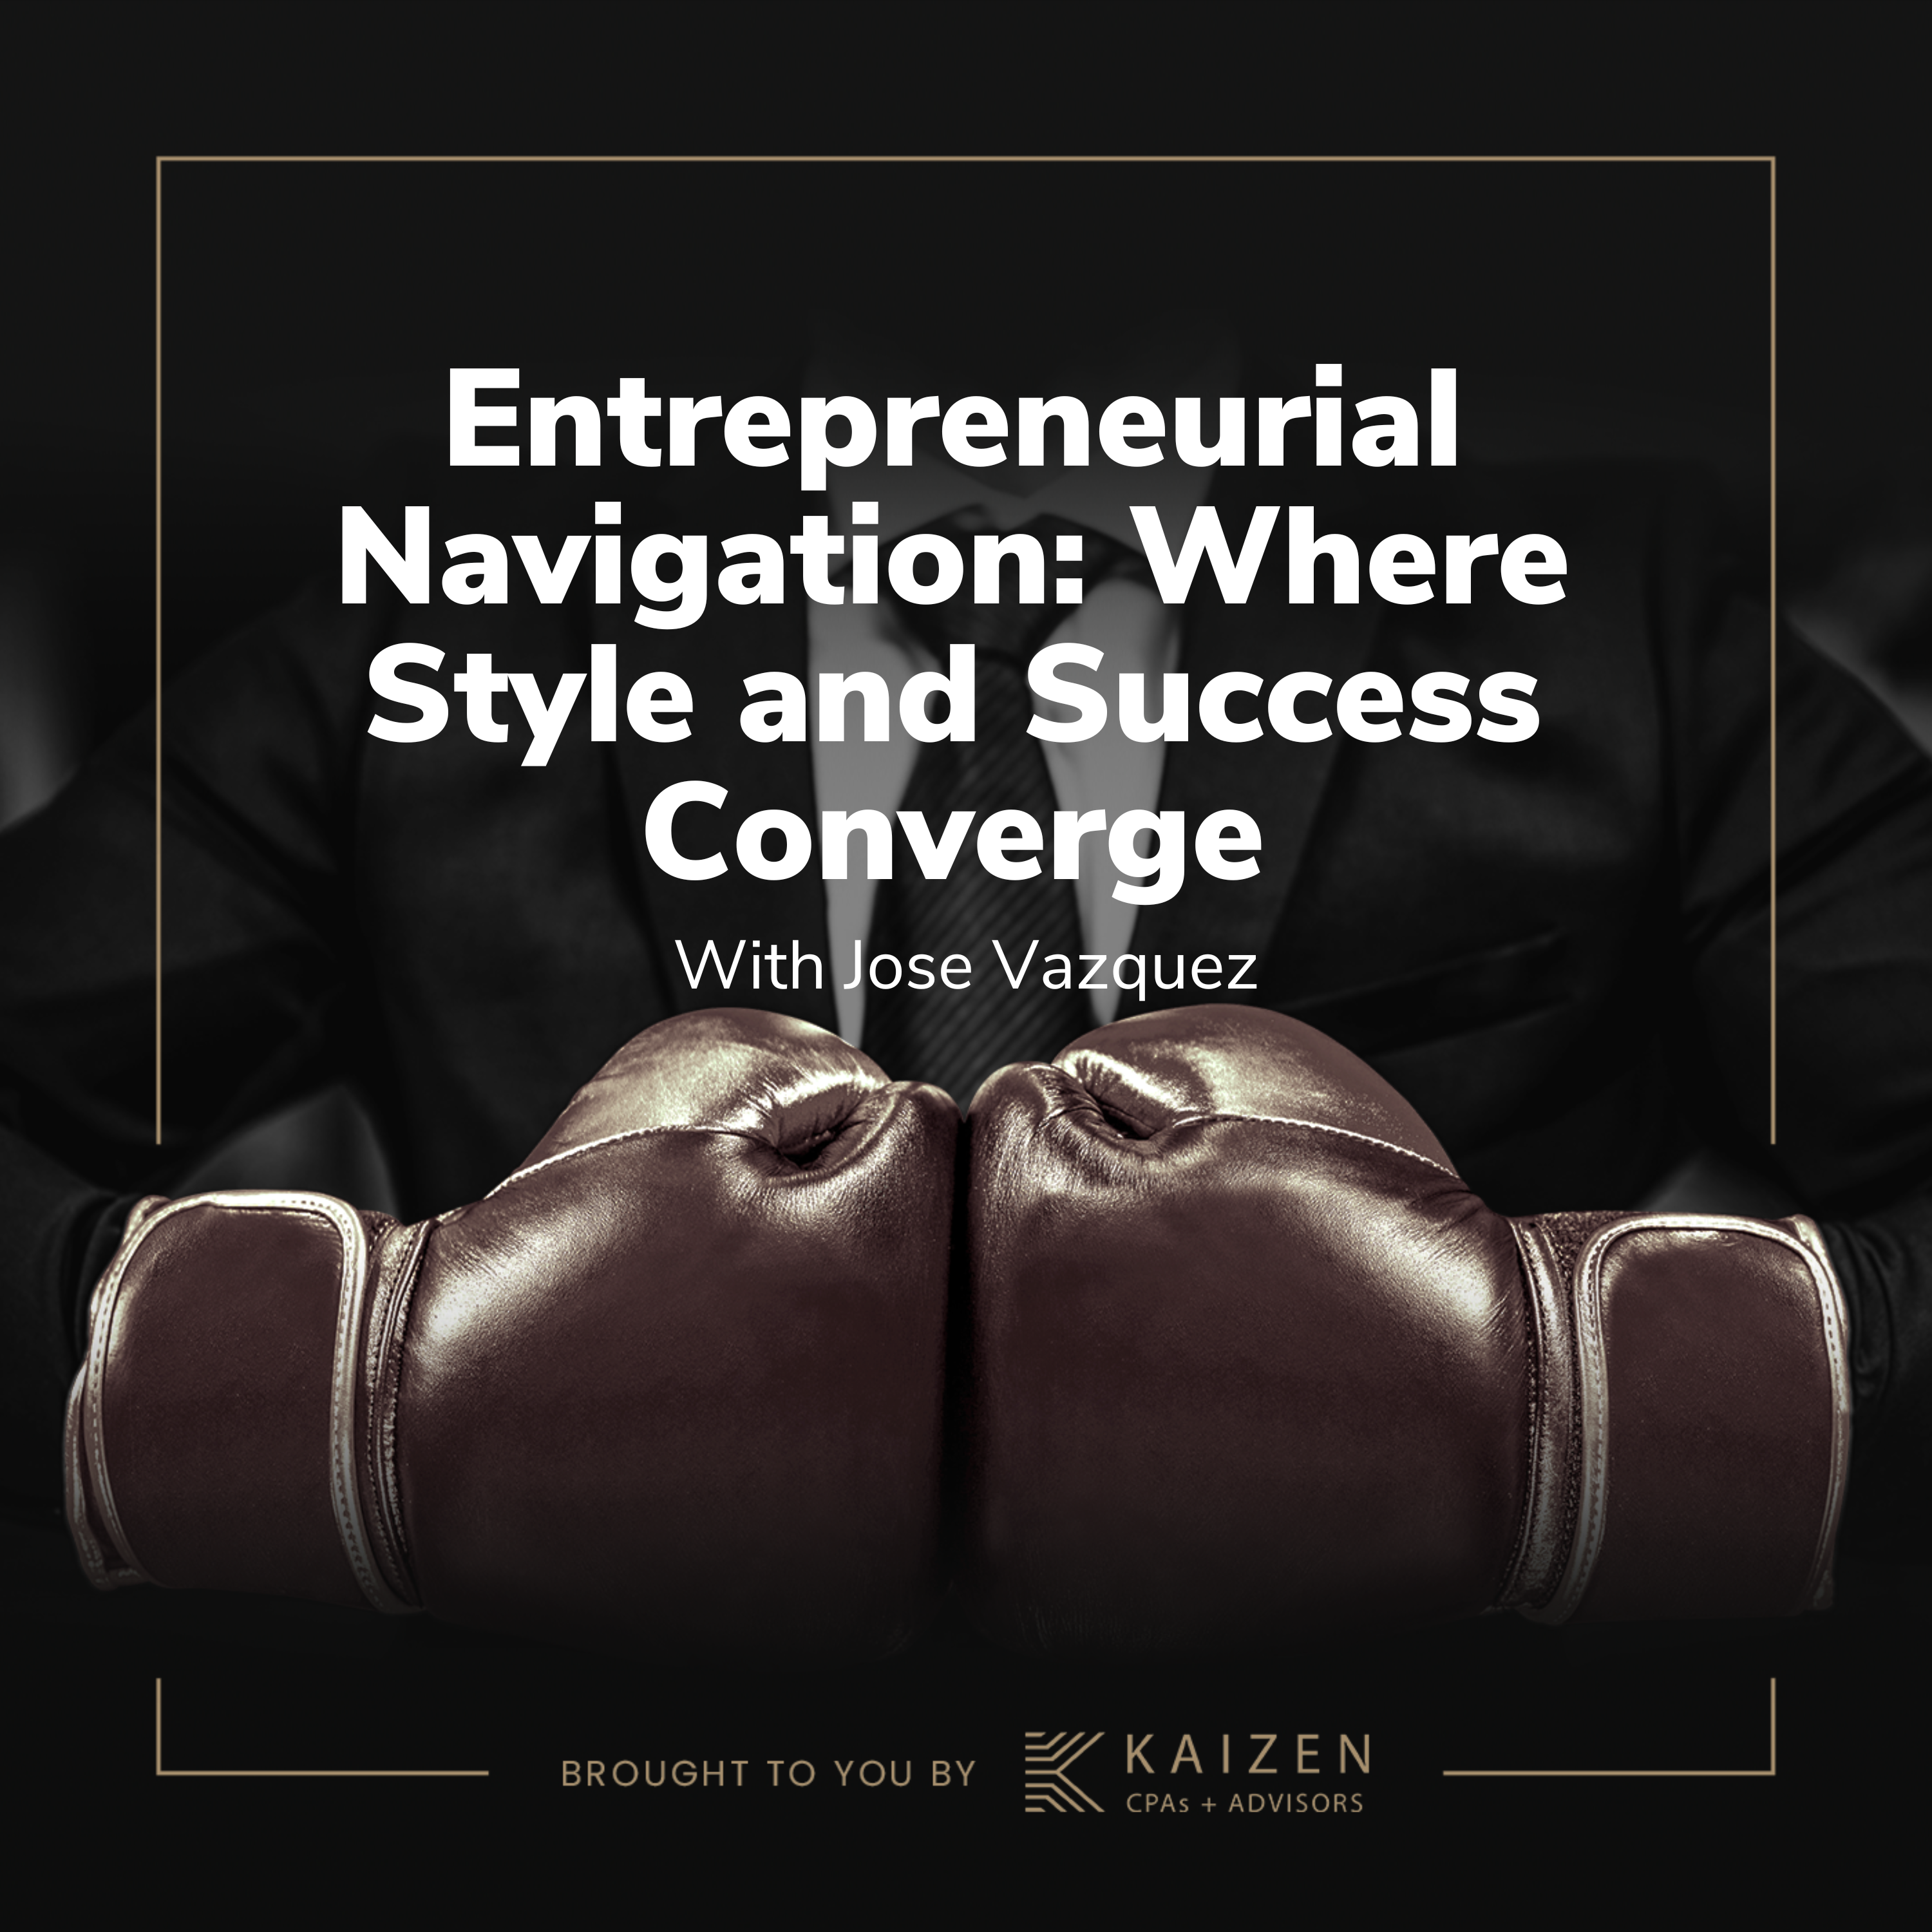 Entrepreneurial Navigation: Where Style and Success Converge